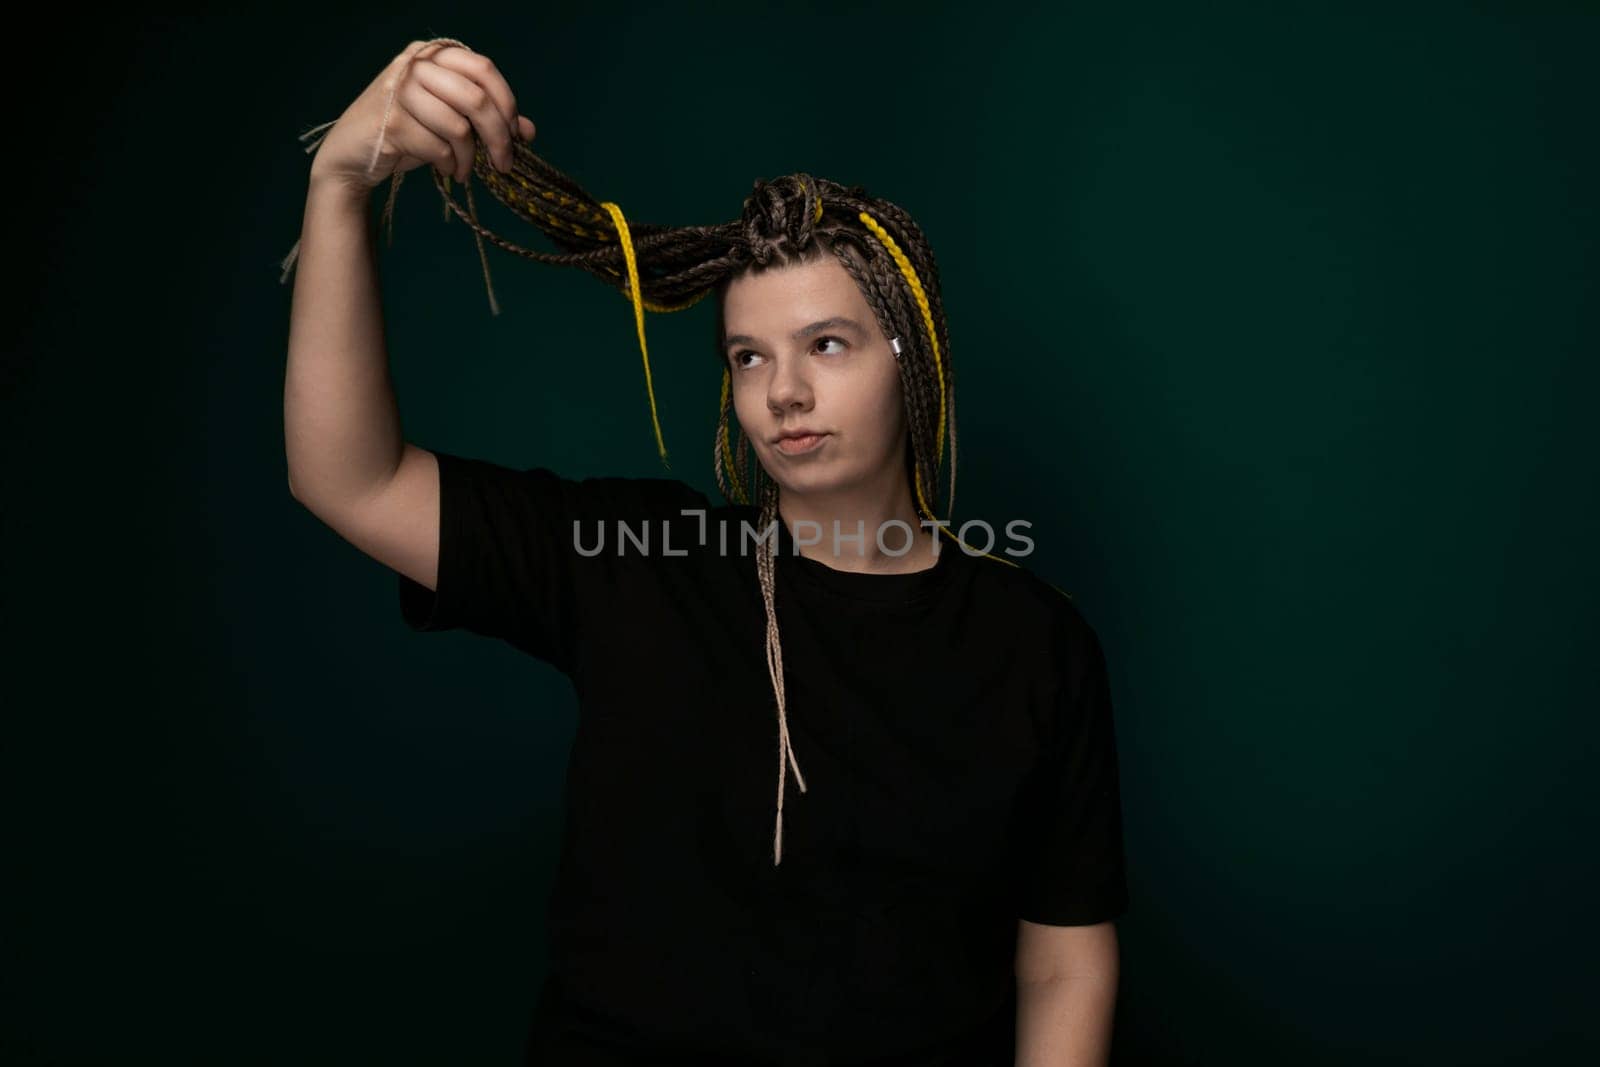 A woman with intricately braided hair is shown holding a pair of scissors in her hand. She appears focused on the task at hand, perhaps preparing to cut her own hair or work on a new hairstyle.